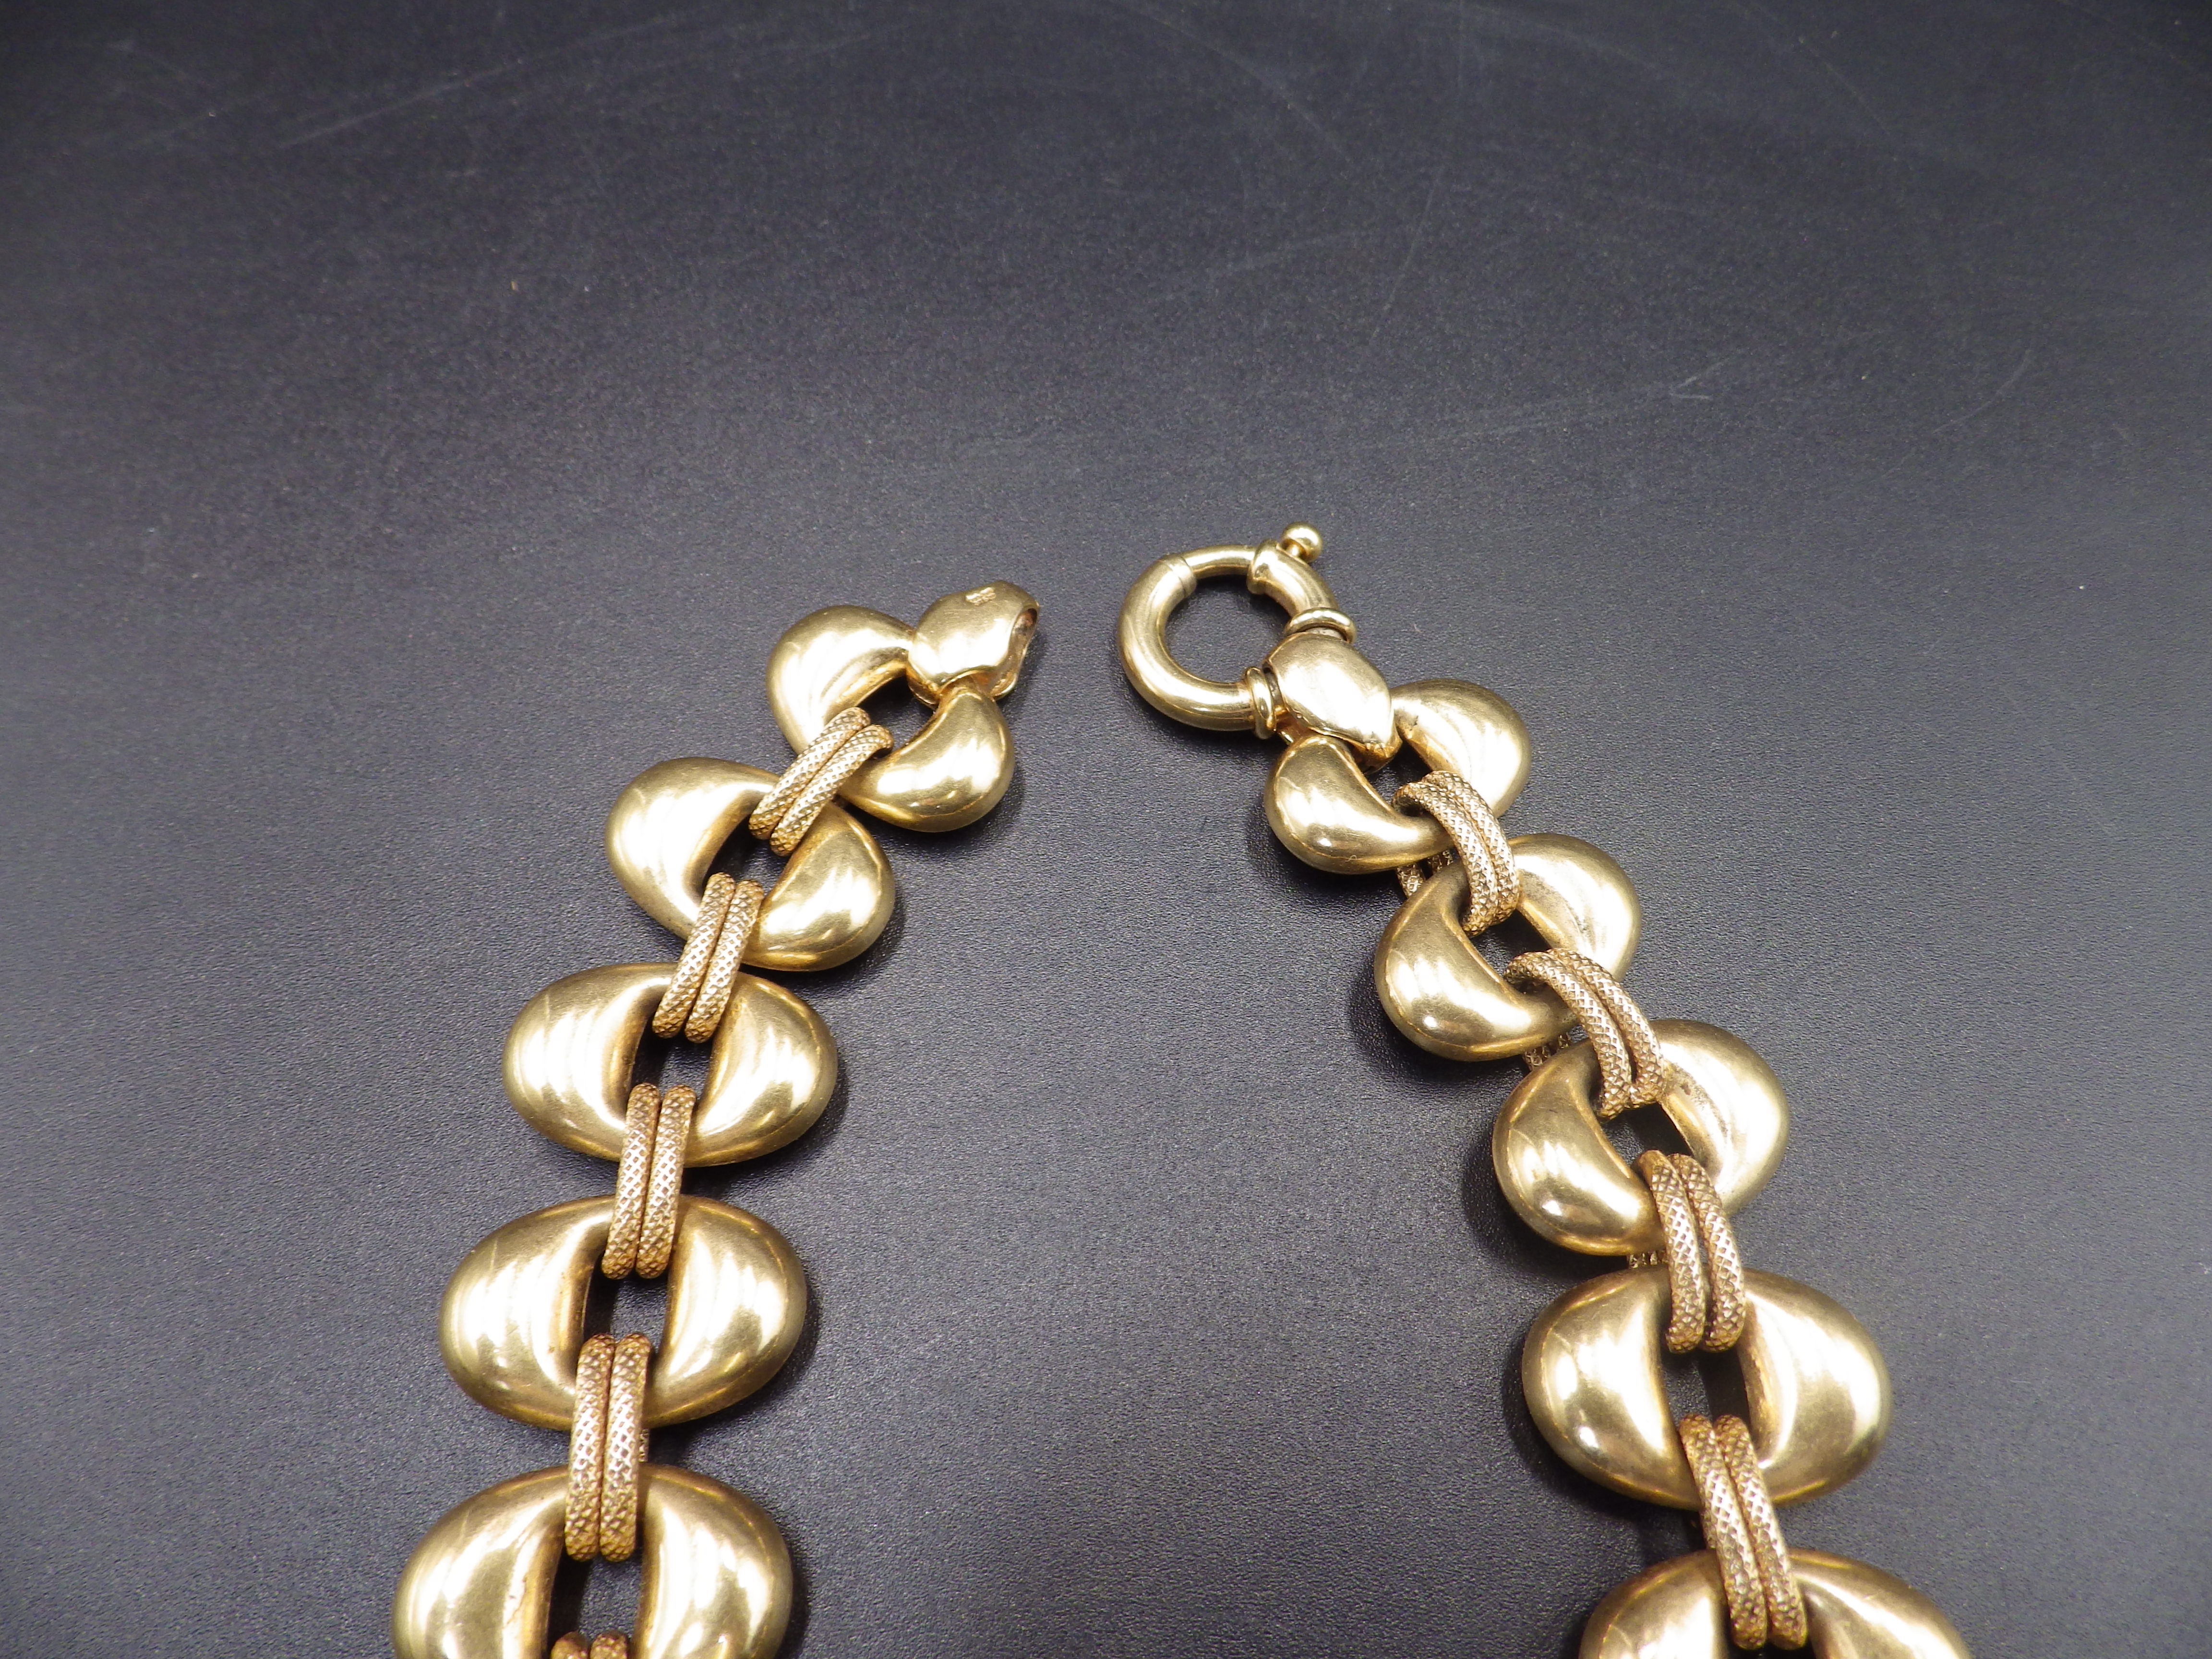 9ct Itailian gold chain by 'Unoaerre' 45cm in length and 48.60g total weight. - Image 3 of 4